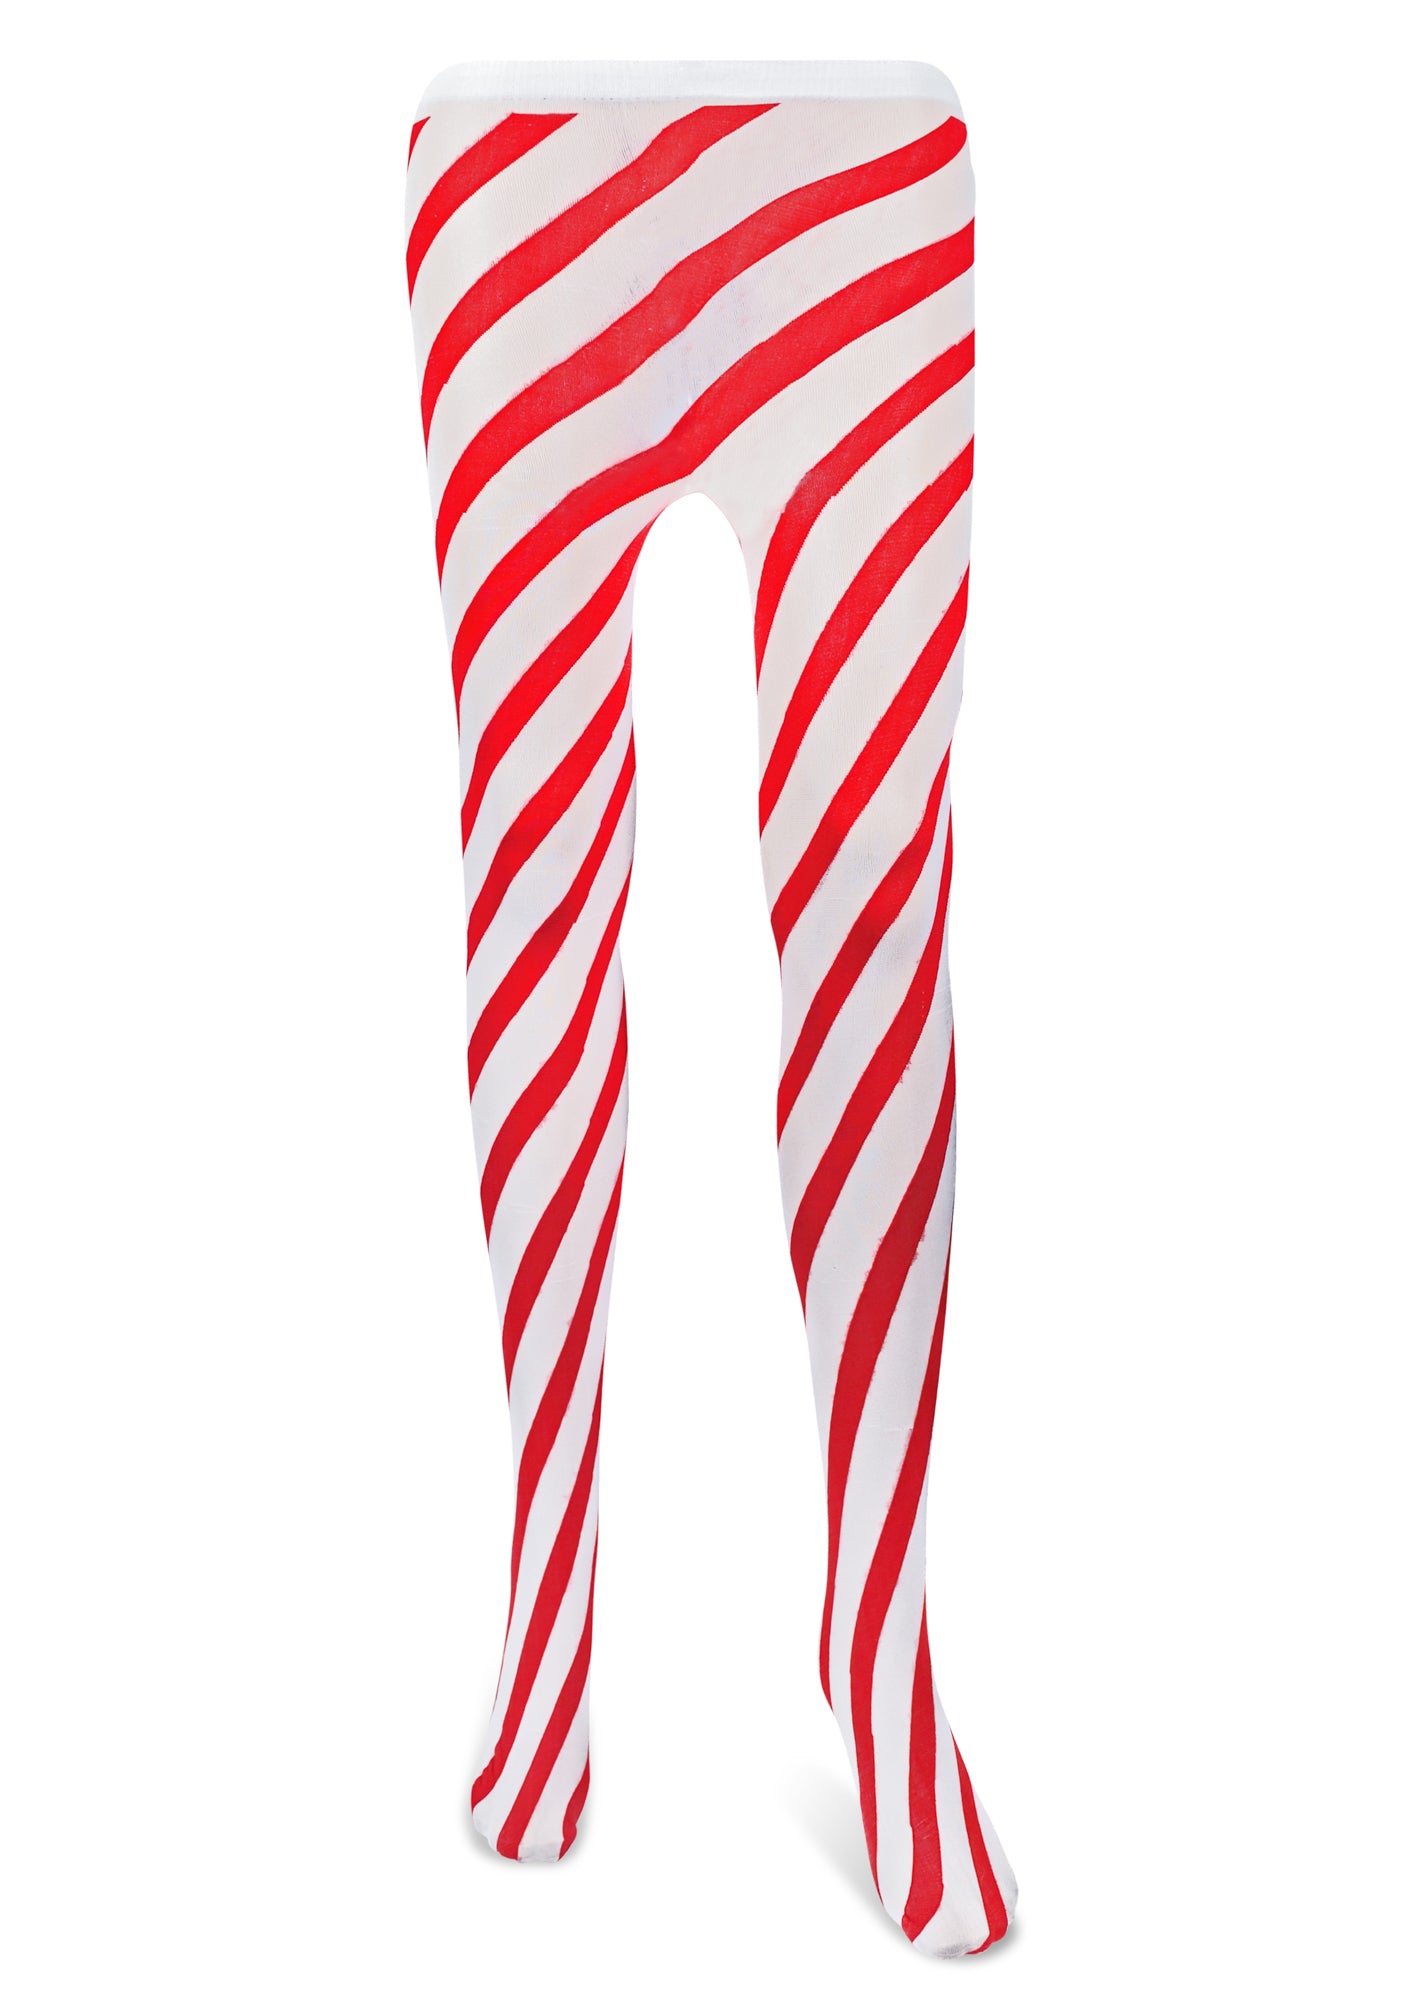 Candy Cane Striped Tights – Red and White Diagonally Striped Nylon Str